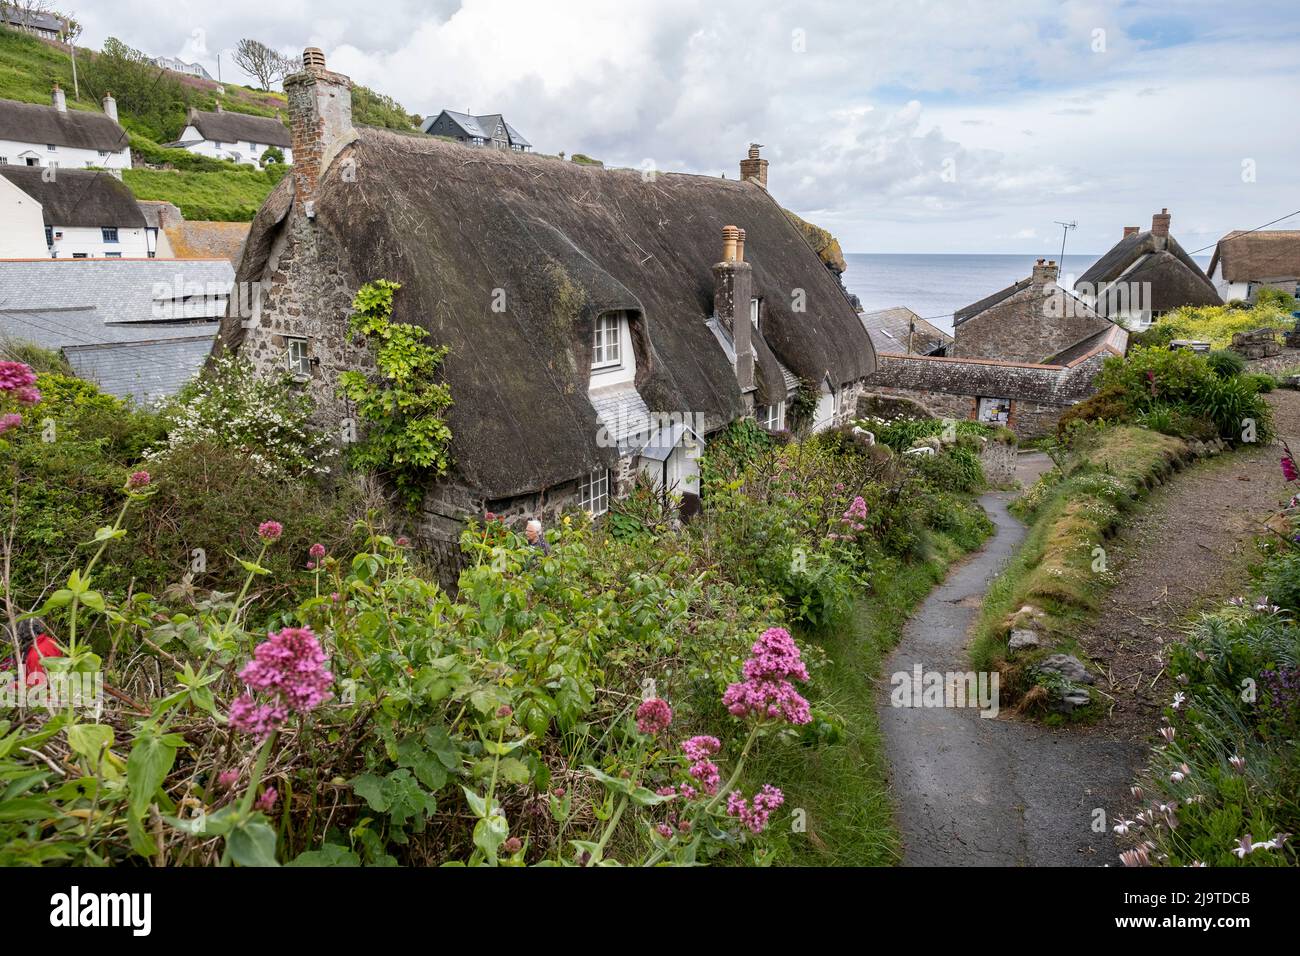 A view of the beautiful seaside village of Cadgwith, Cornwall, England. Stock Photo